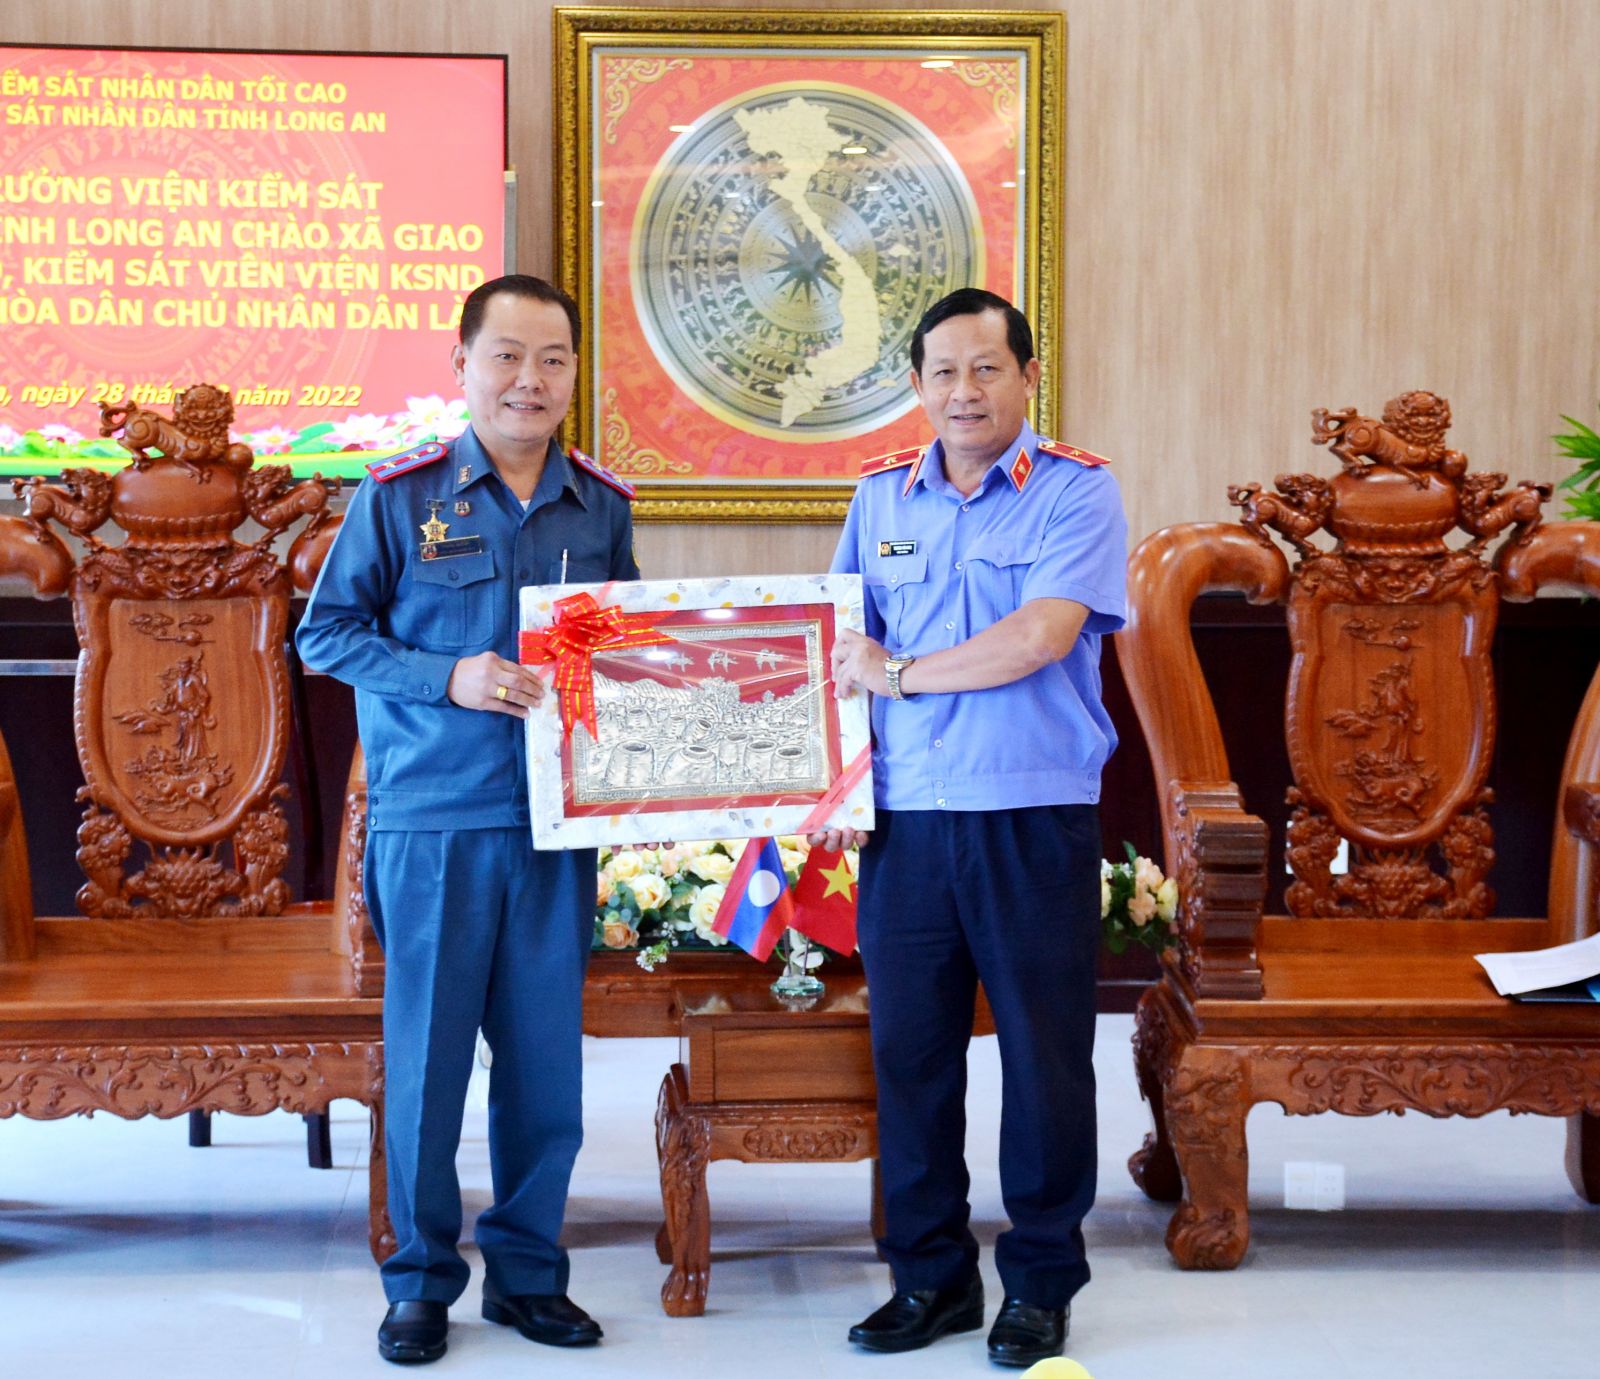 Deputy Director General of Organization and Personnel, People's Procuracy of Lao PDR - Khamnouthone Sounvileoth presents souvenirs to the Provincial People's Procuracy